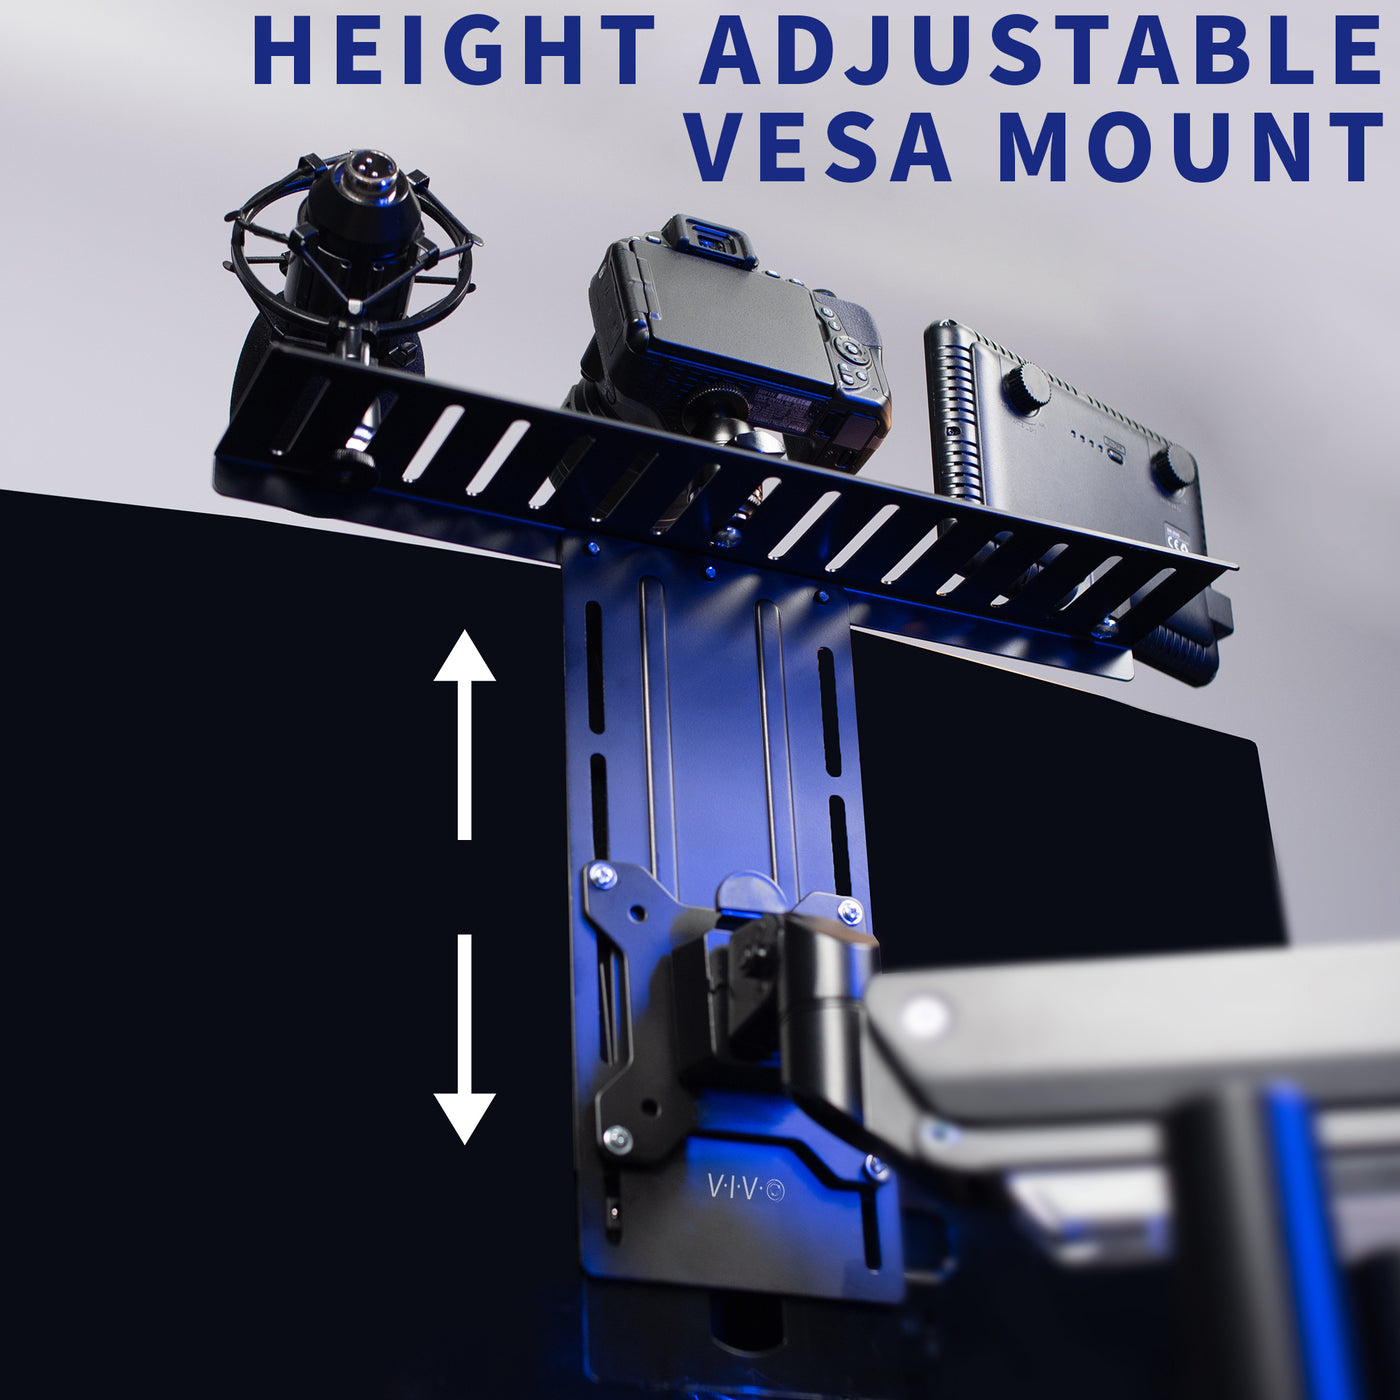 Height adjustable VESA mount allows the shelf to be compatible with most monitors.